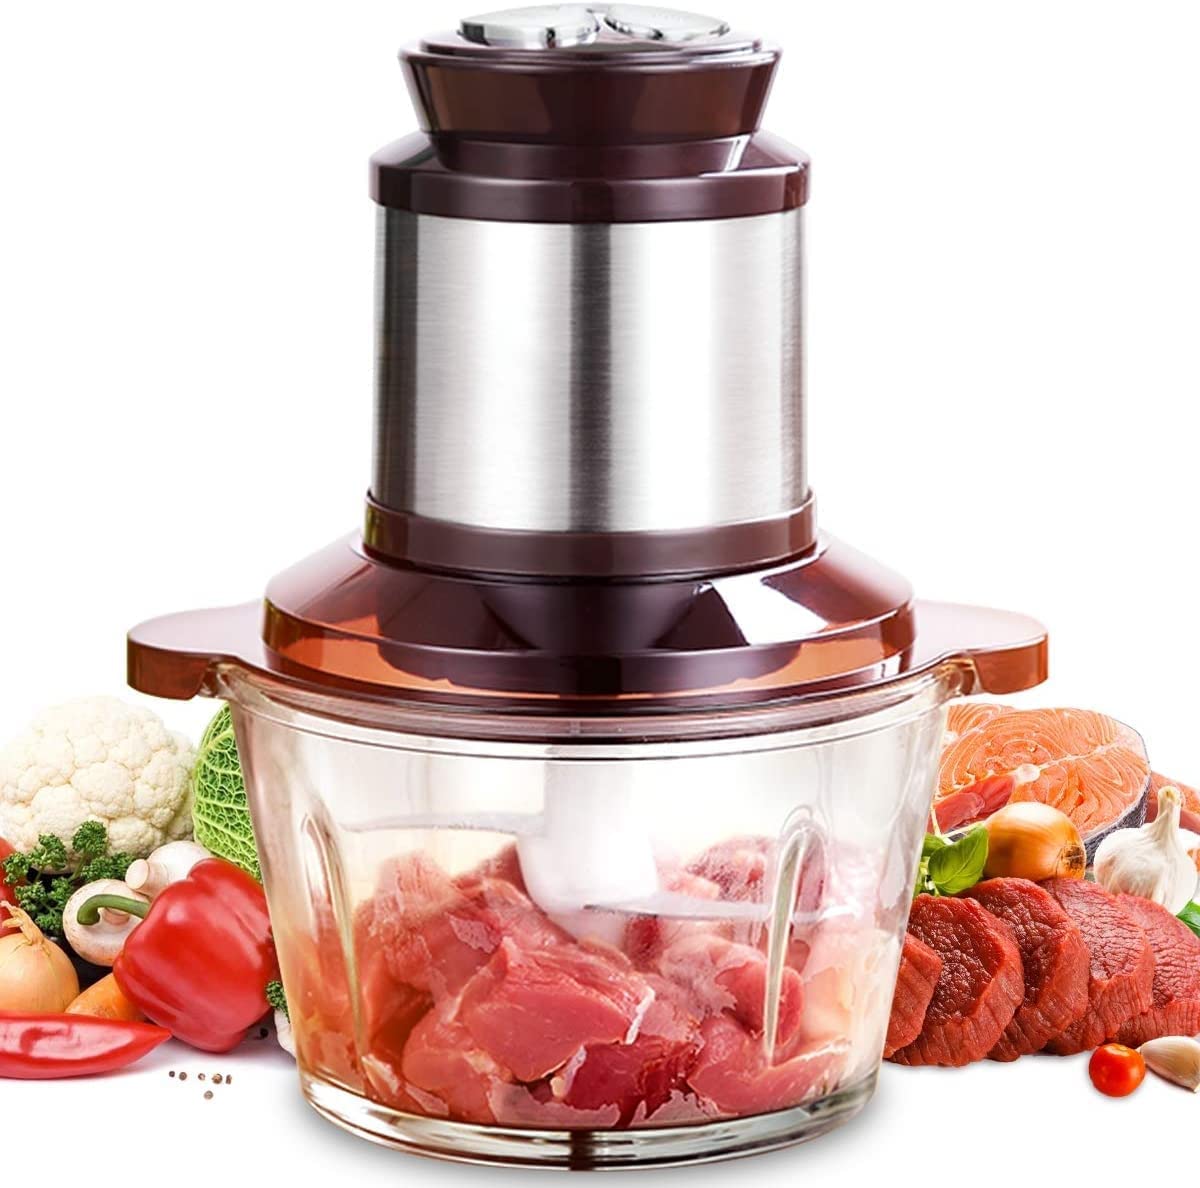 Patsnap 300 W Universal Electric Chopper with 2 L Glass Container, Electric Multi Chopper with 3 Speed Levels and 4 Stainless Steel Blade, Suitable for Vegetables, Fruit and Meat